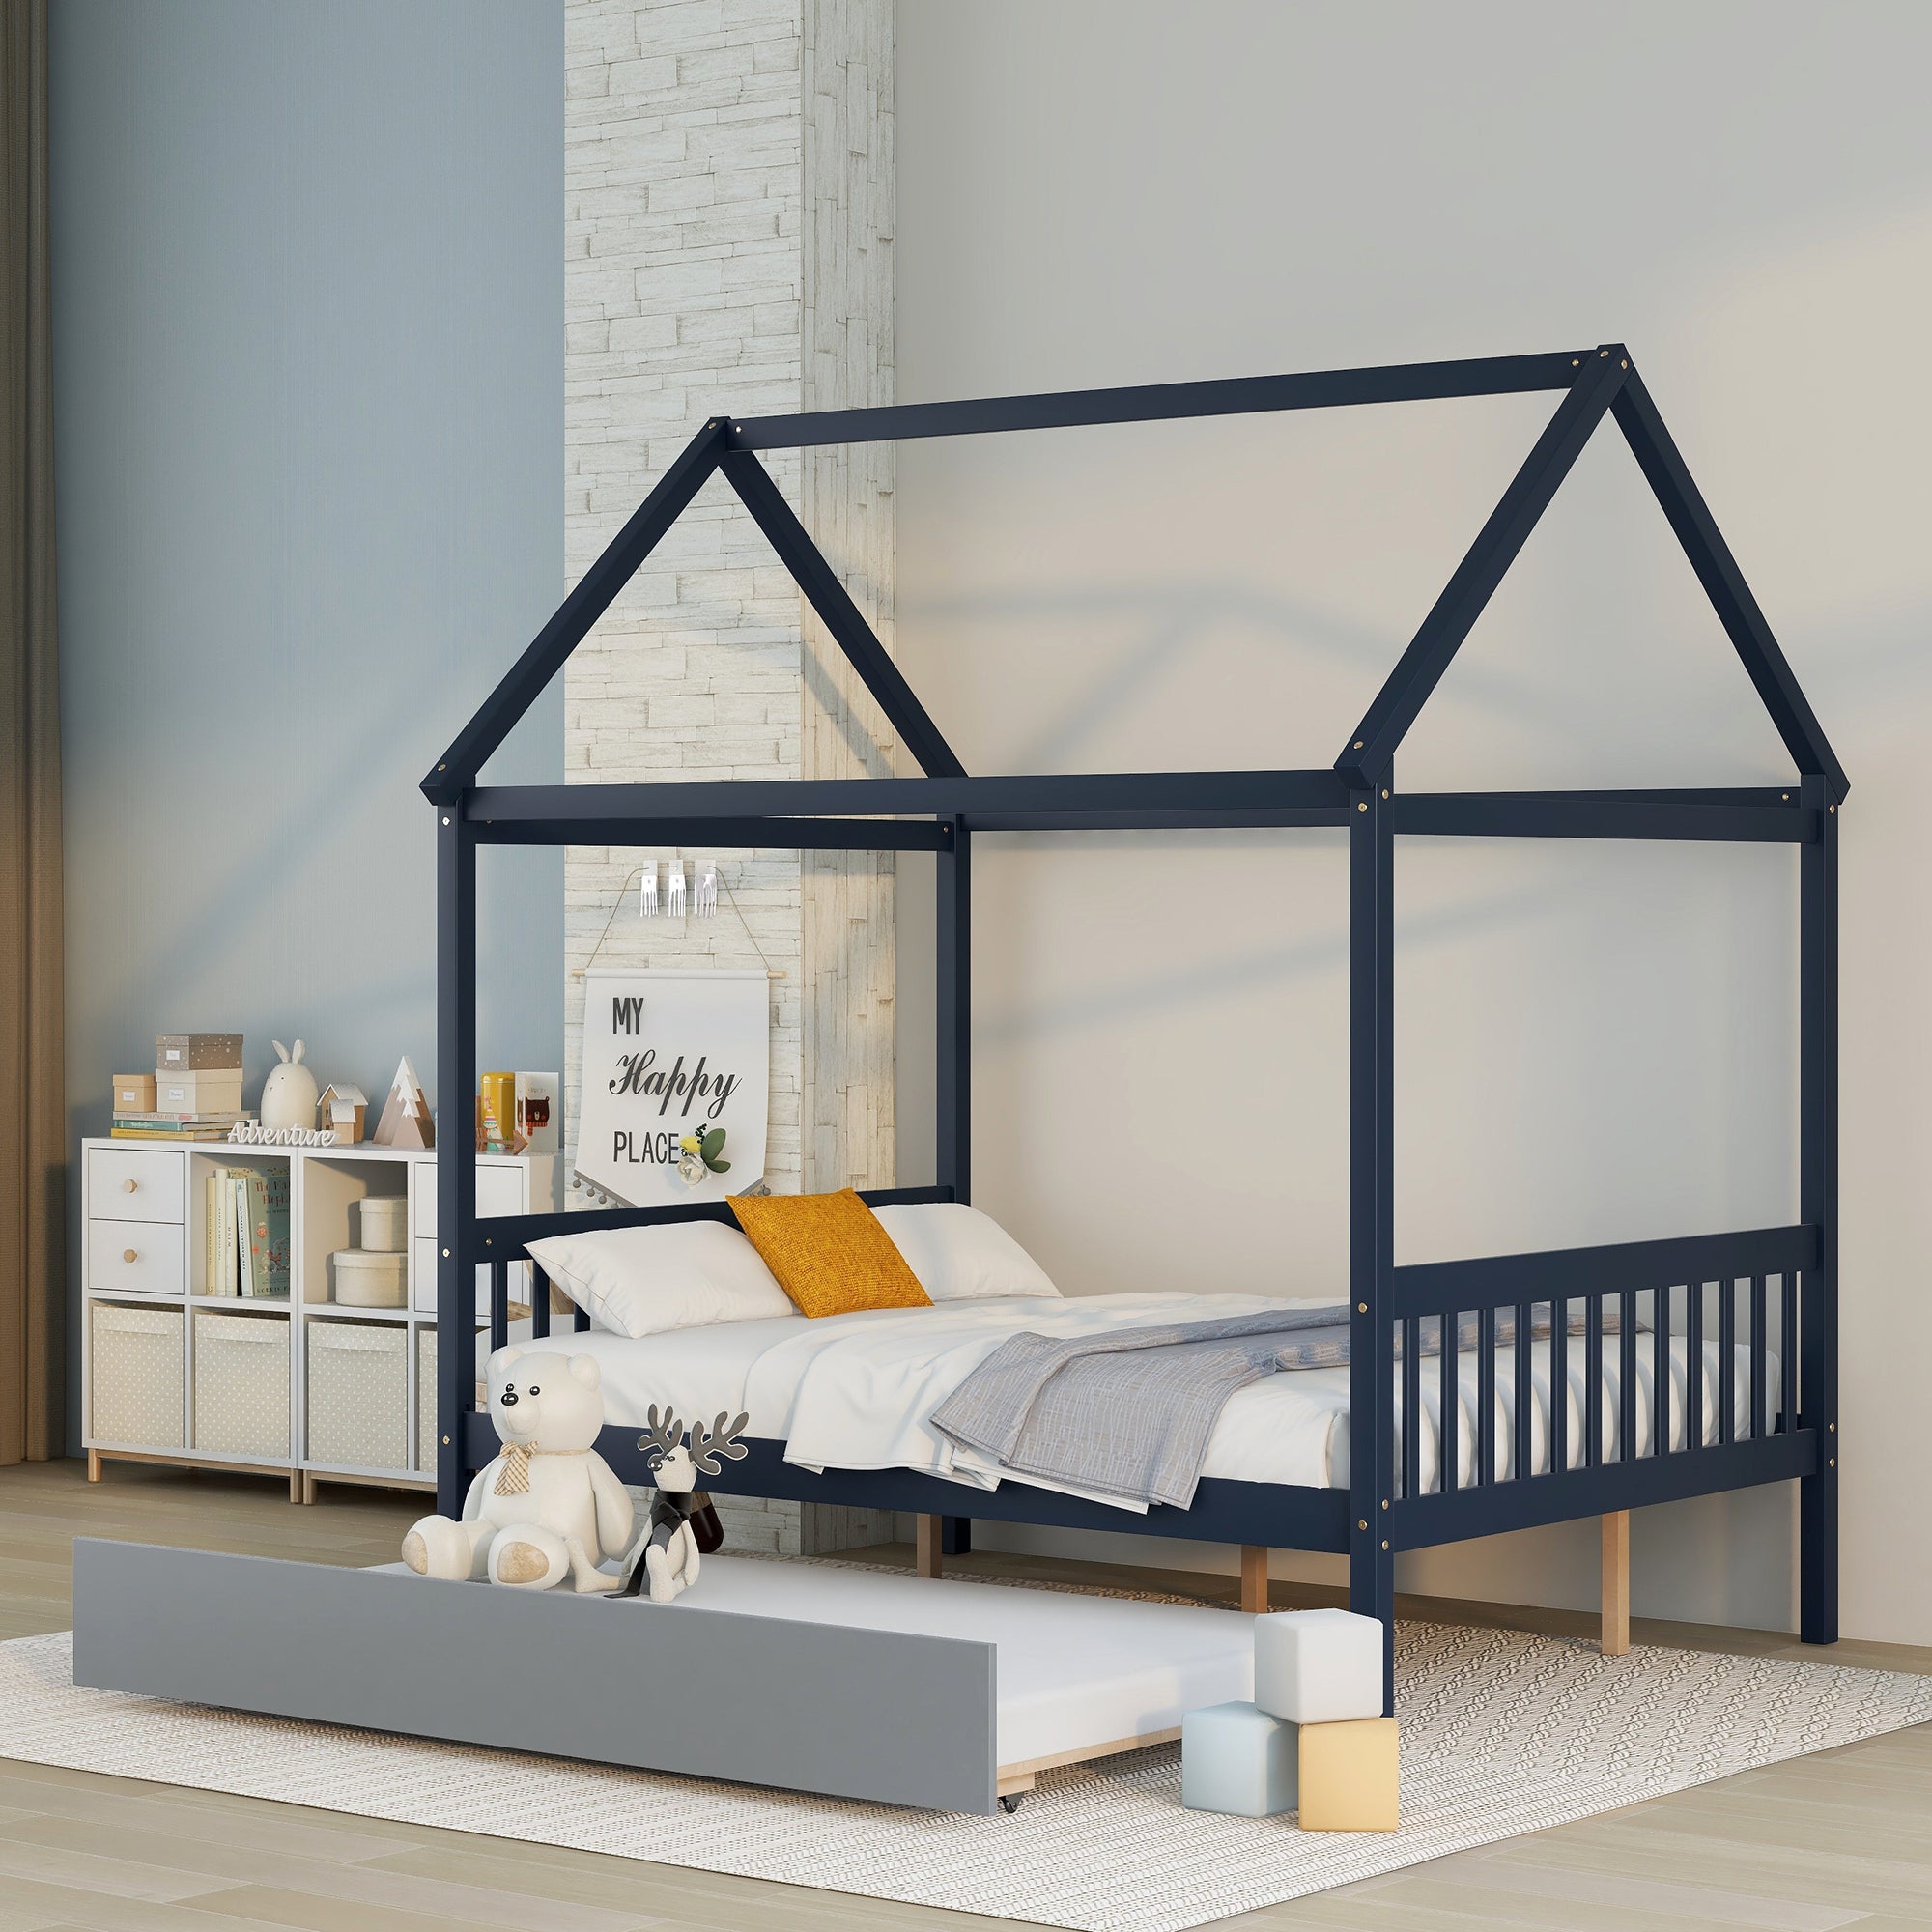 NAVY BLUE HOUSE FULL BED WITH TRUNDLE OF GREY COLOR blue-pine